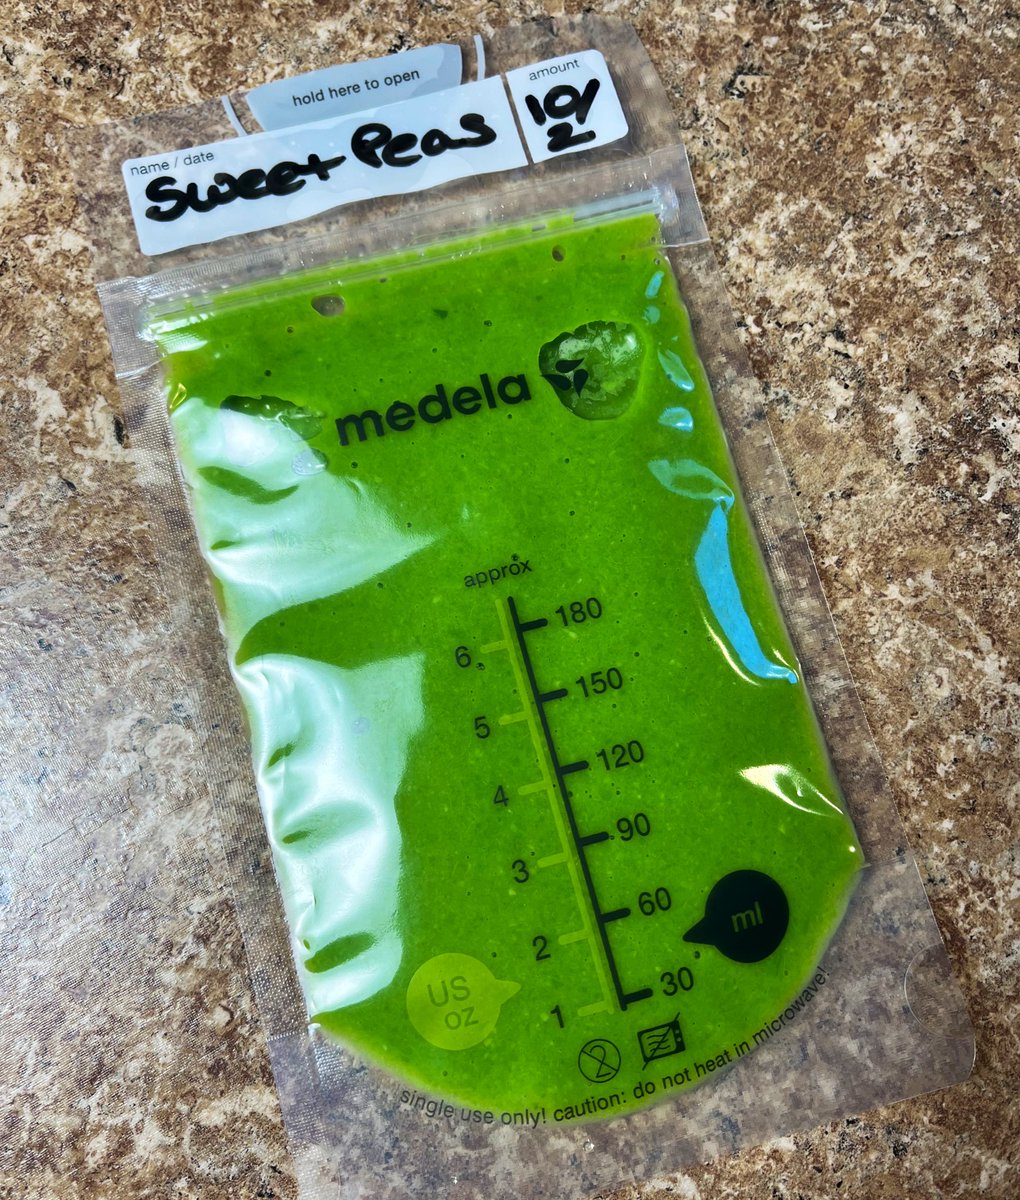 Made all new baby food for Tiana today! 💗 Mashed avocado + kefir, steamed butternut squash + sweet potato purée, and puréed sweet peas.

Also had a little extra for the freezer. Great way to use up those leftover Medela breastmilk storage bags.

#HomemadeBabyFood #WeeSprout